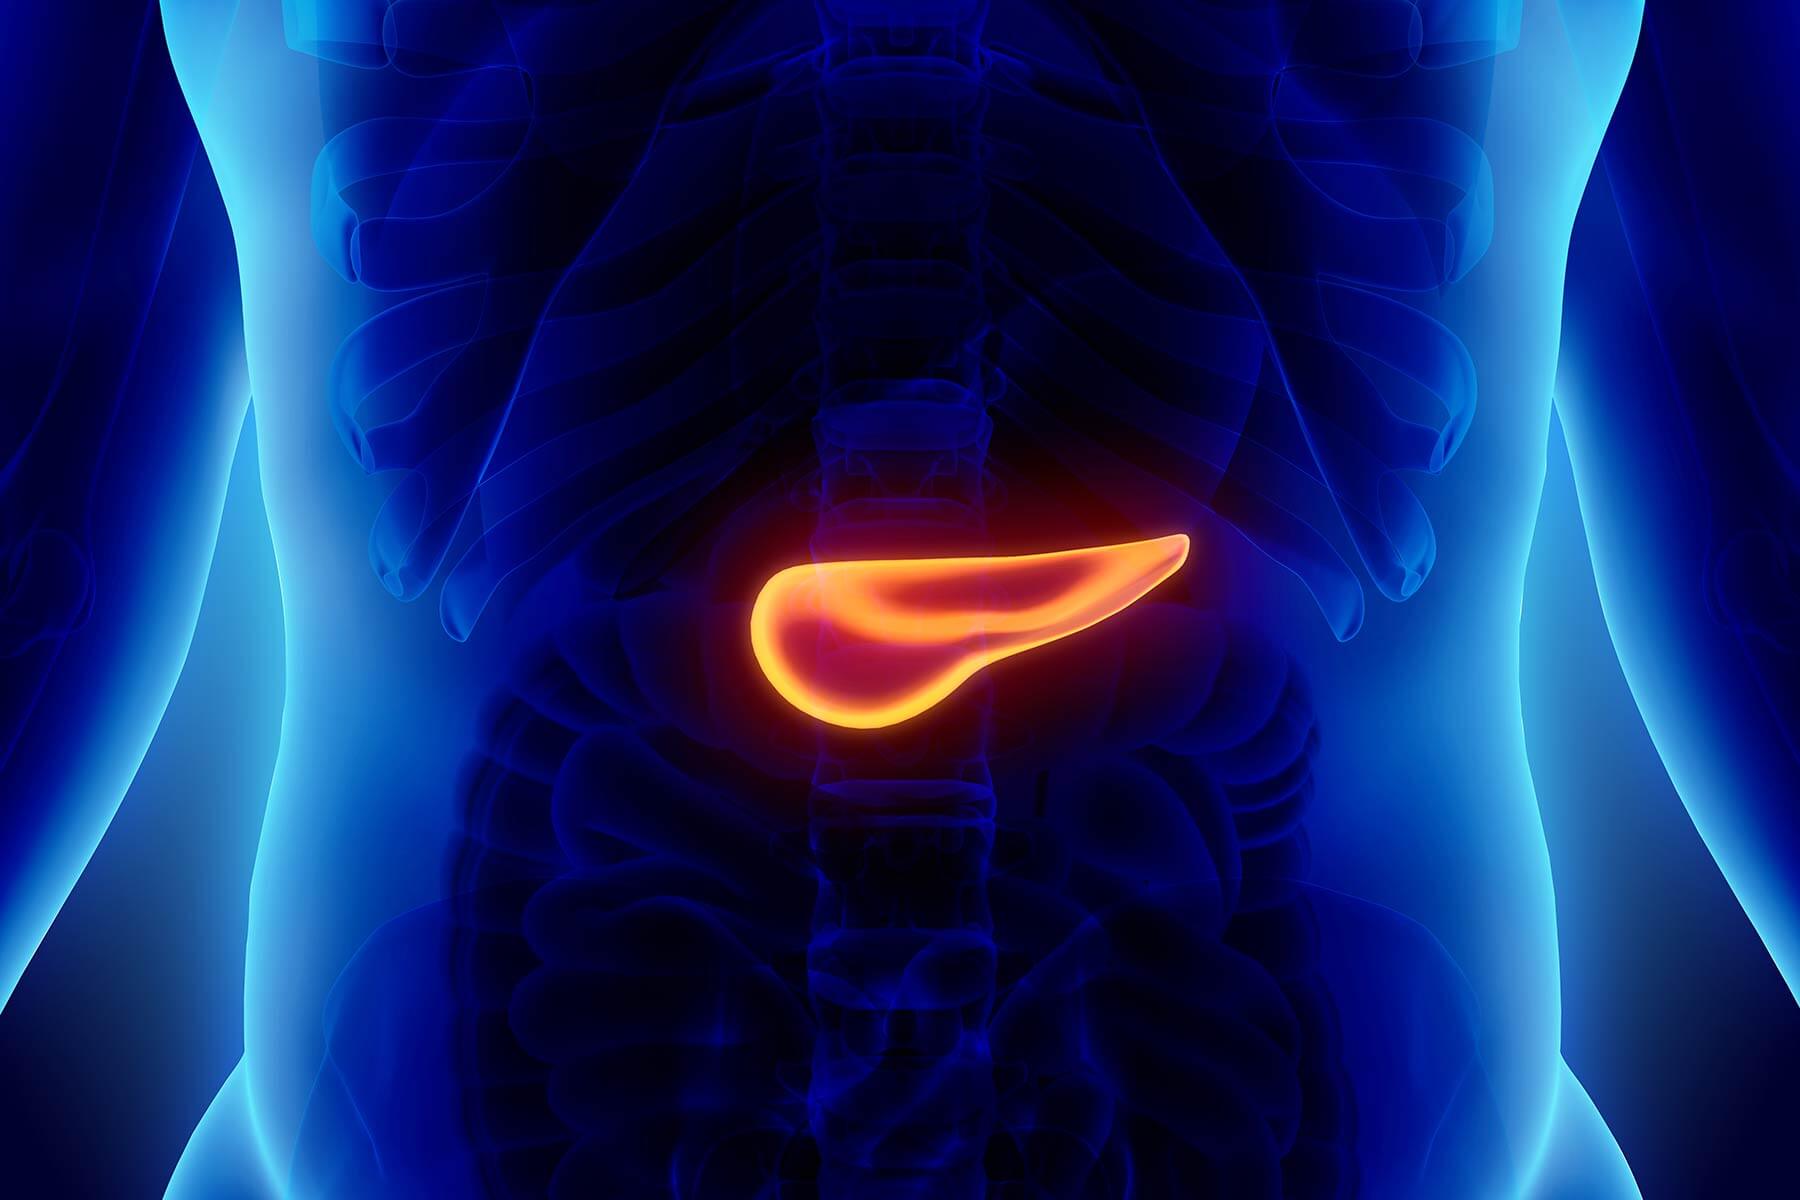 Pancreatic Cancer Action - Back pain is experienced by many people